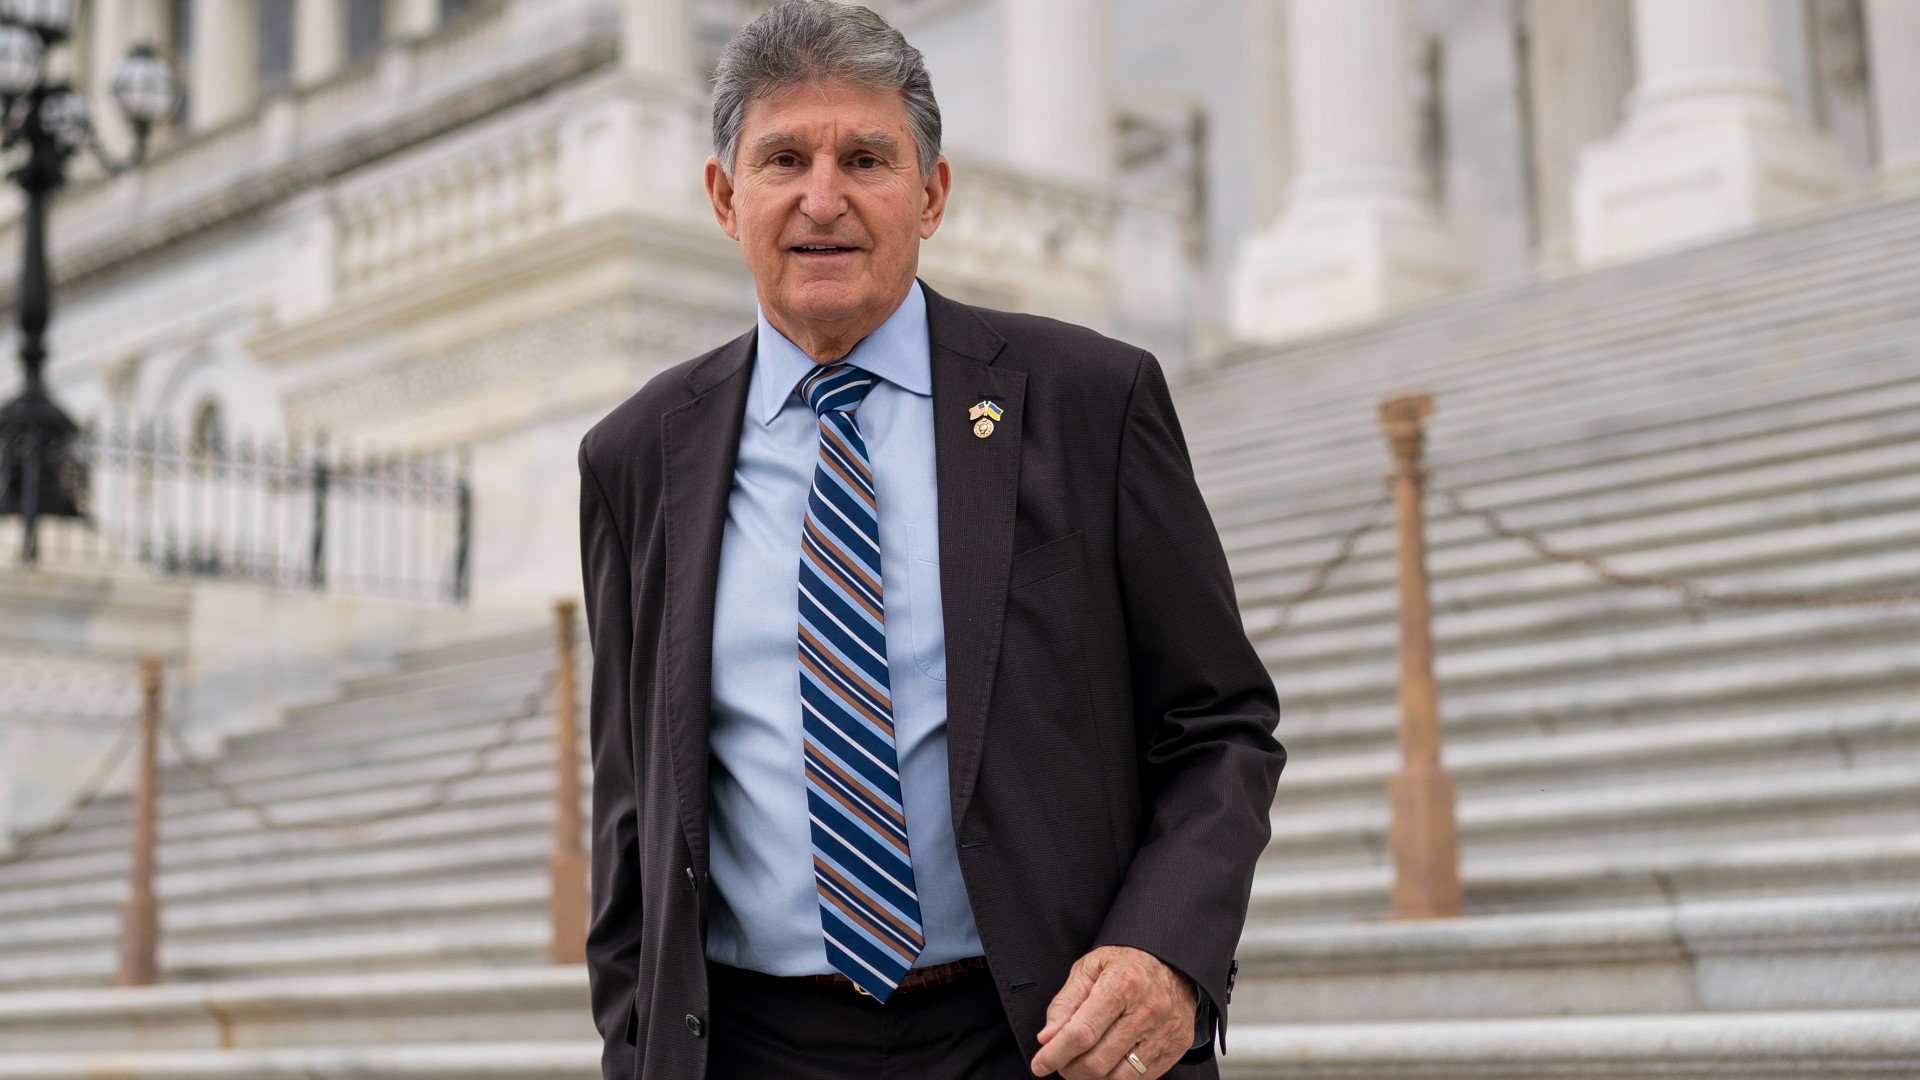 For months, Manchin's opposition had blocked a larger agreement sought by President Joe Biden and other Democrats.